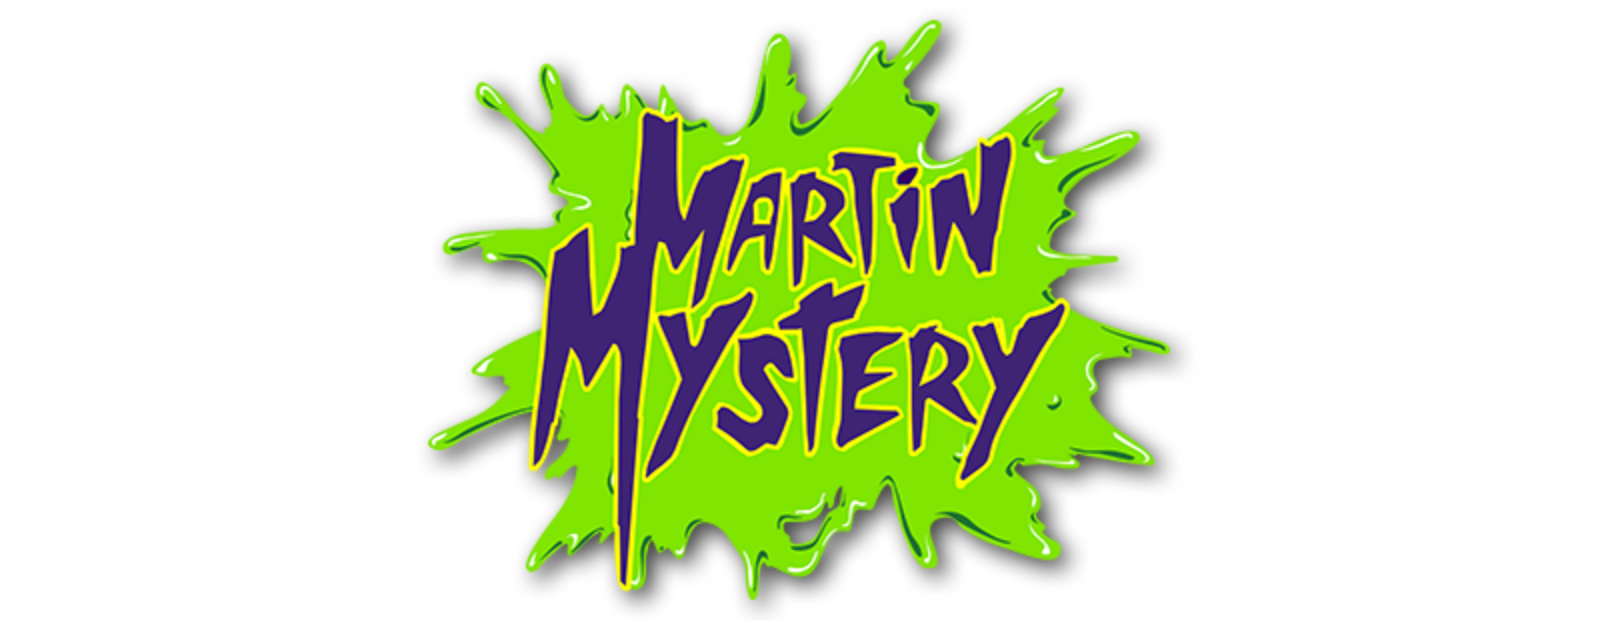 Martin Mystery Volume 1 and 2 (8 DVDs Box Set)